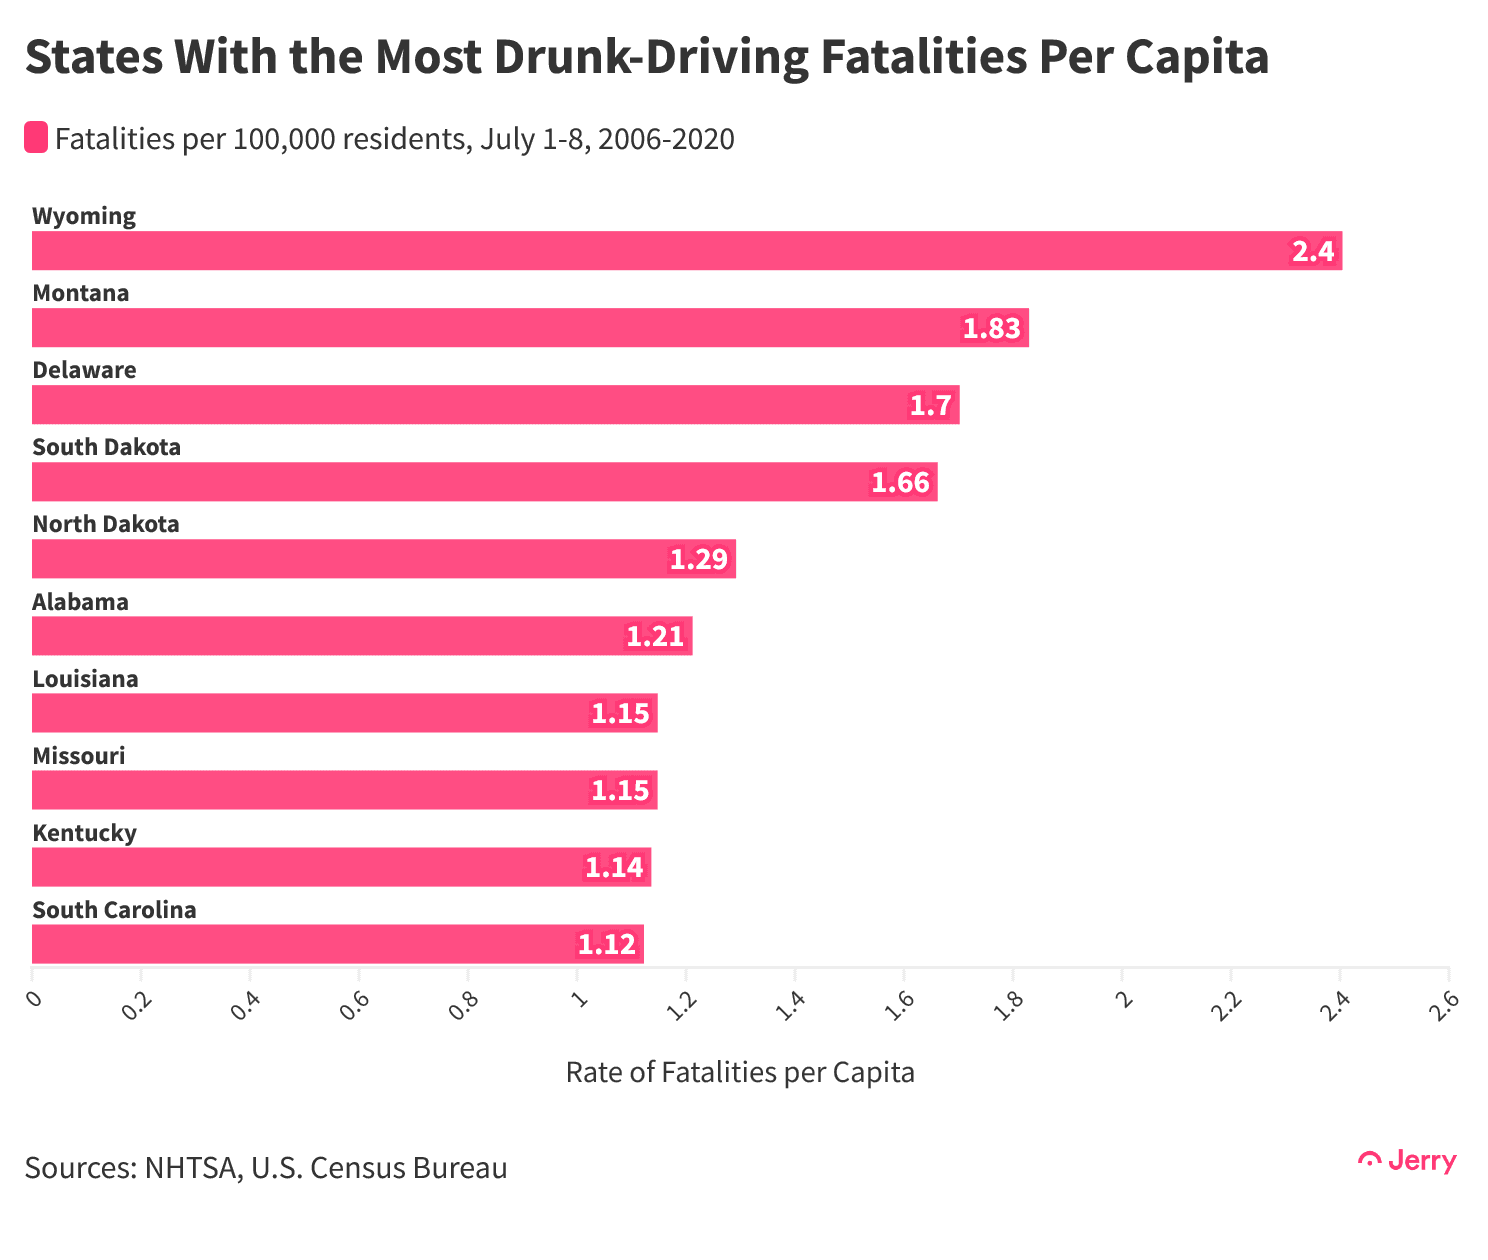 States With the Most Drunk-Driving Fatalities Per Capita, 2006-2020@2x(1)